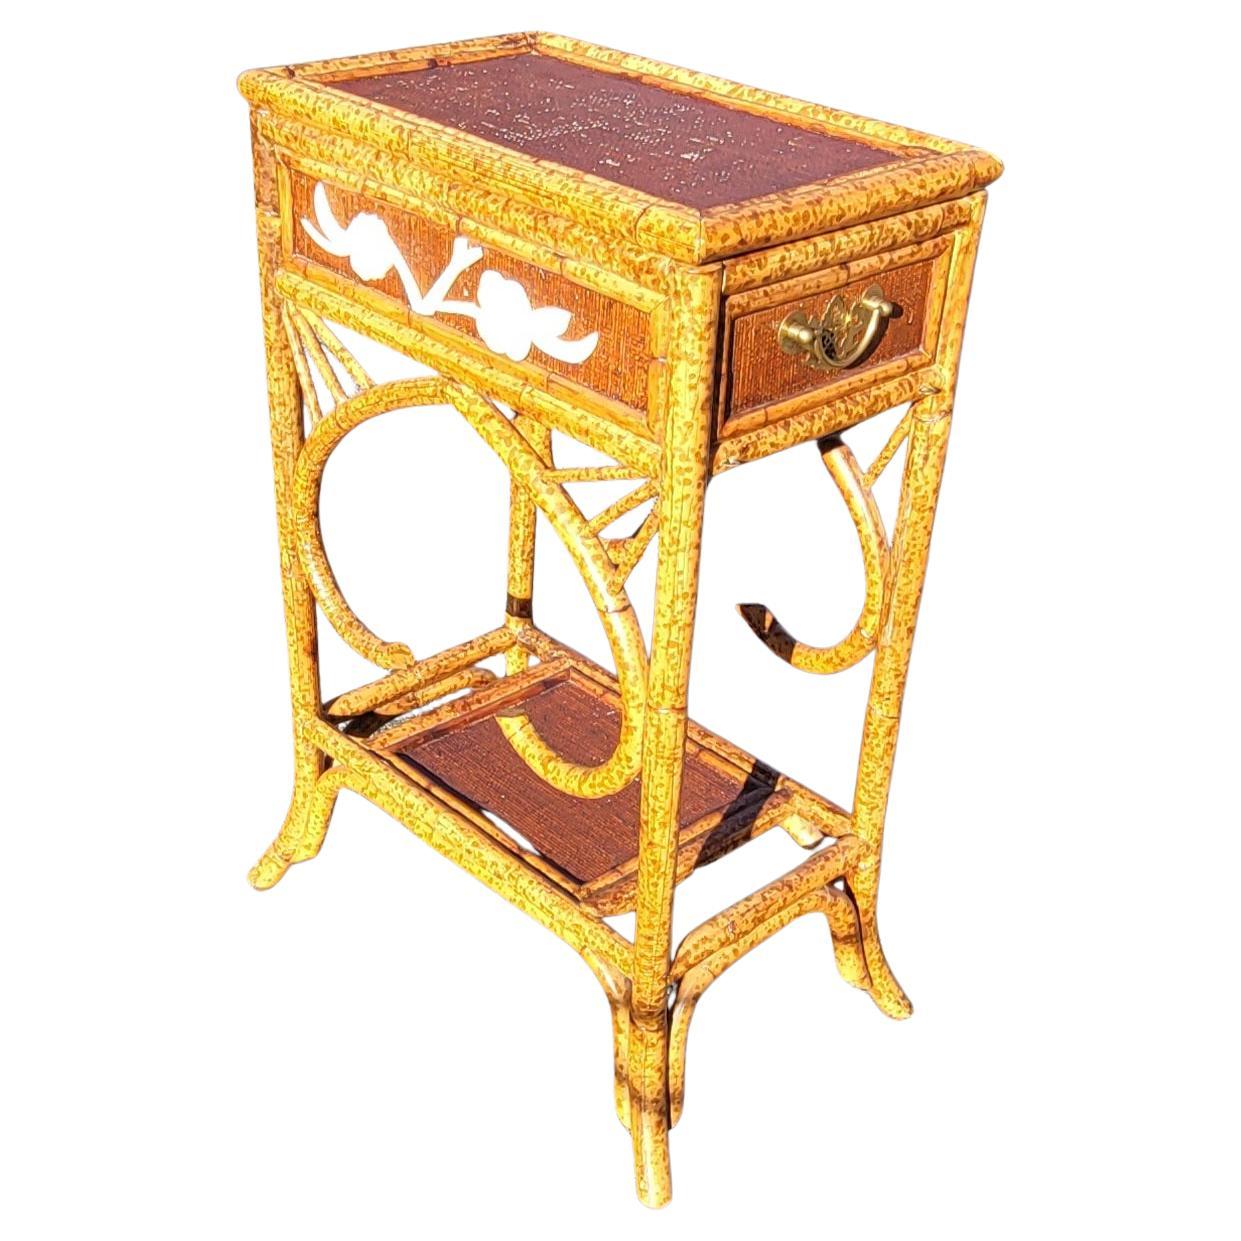 A sunning Mother-of-Pearl Decorated Rattan Flip Top side table cabinet in good vintage condition measuring 18.5